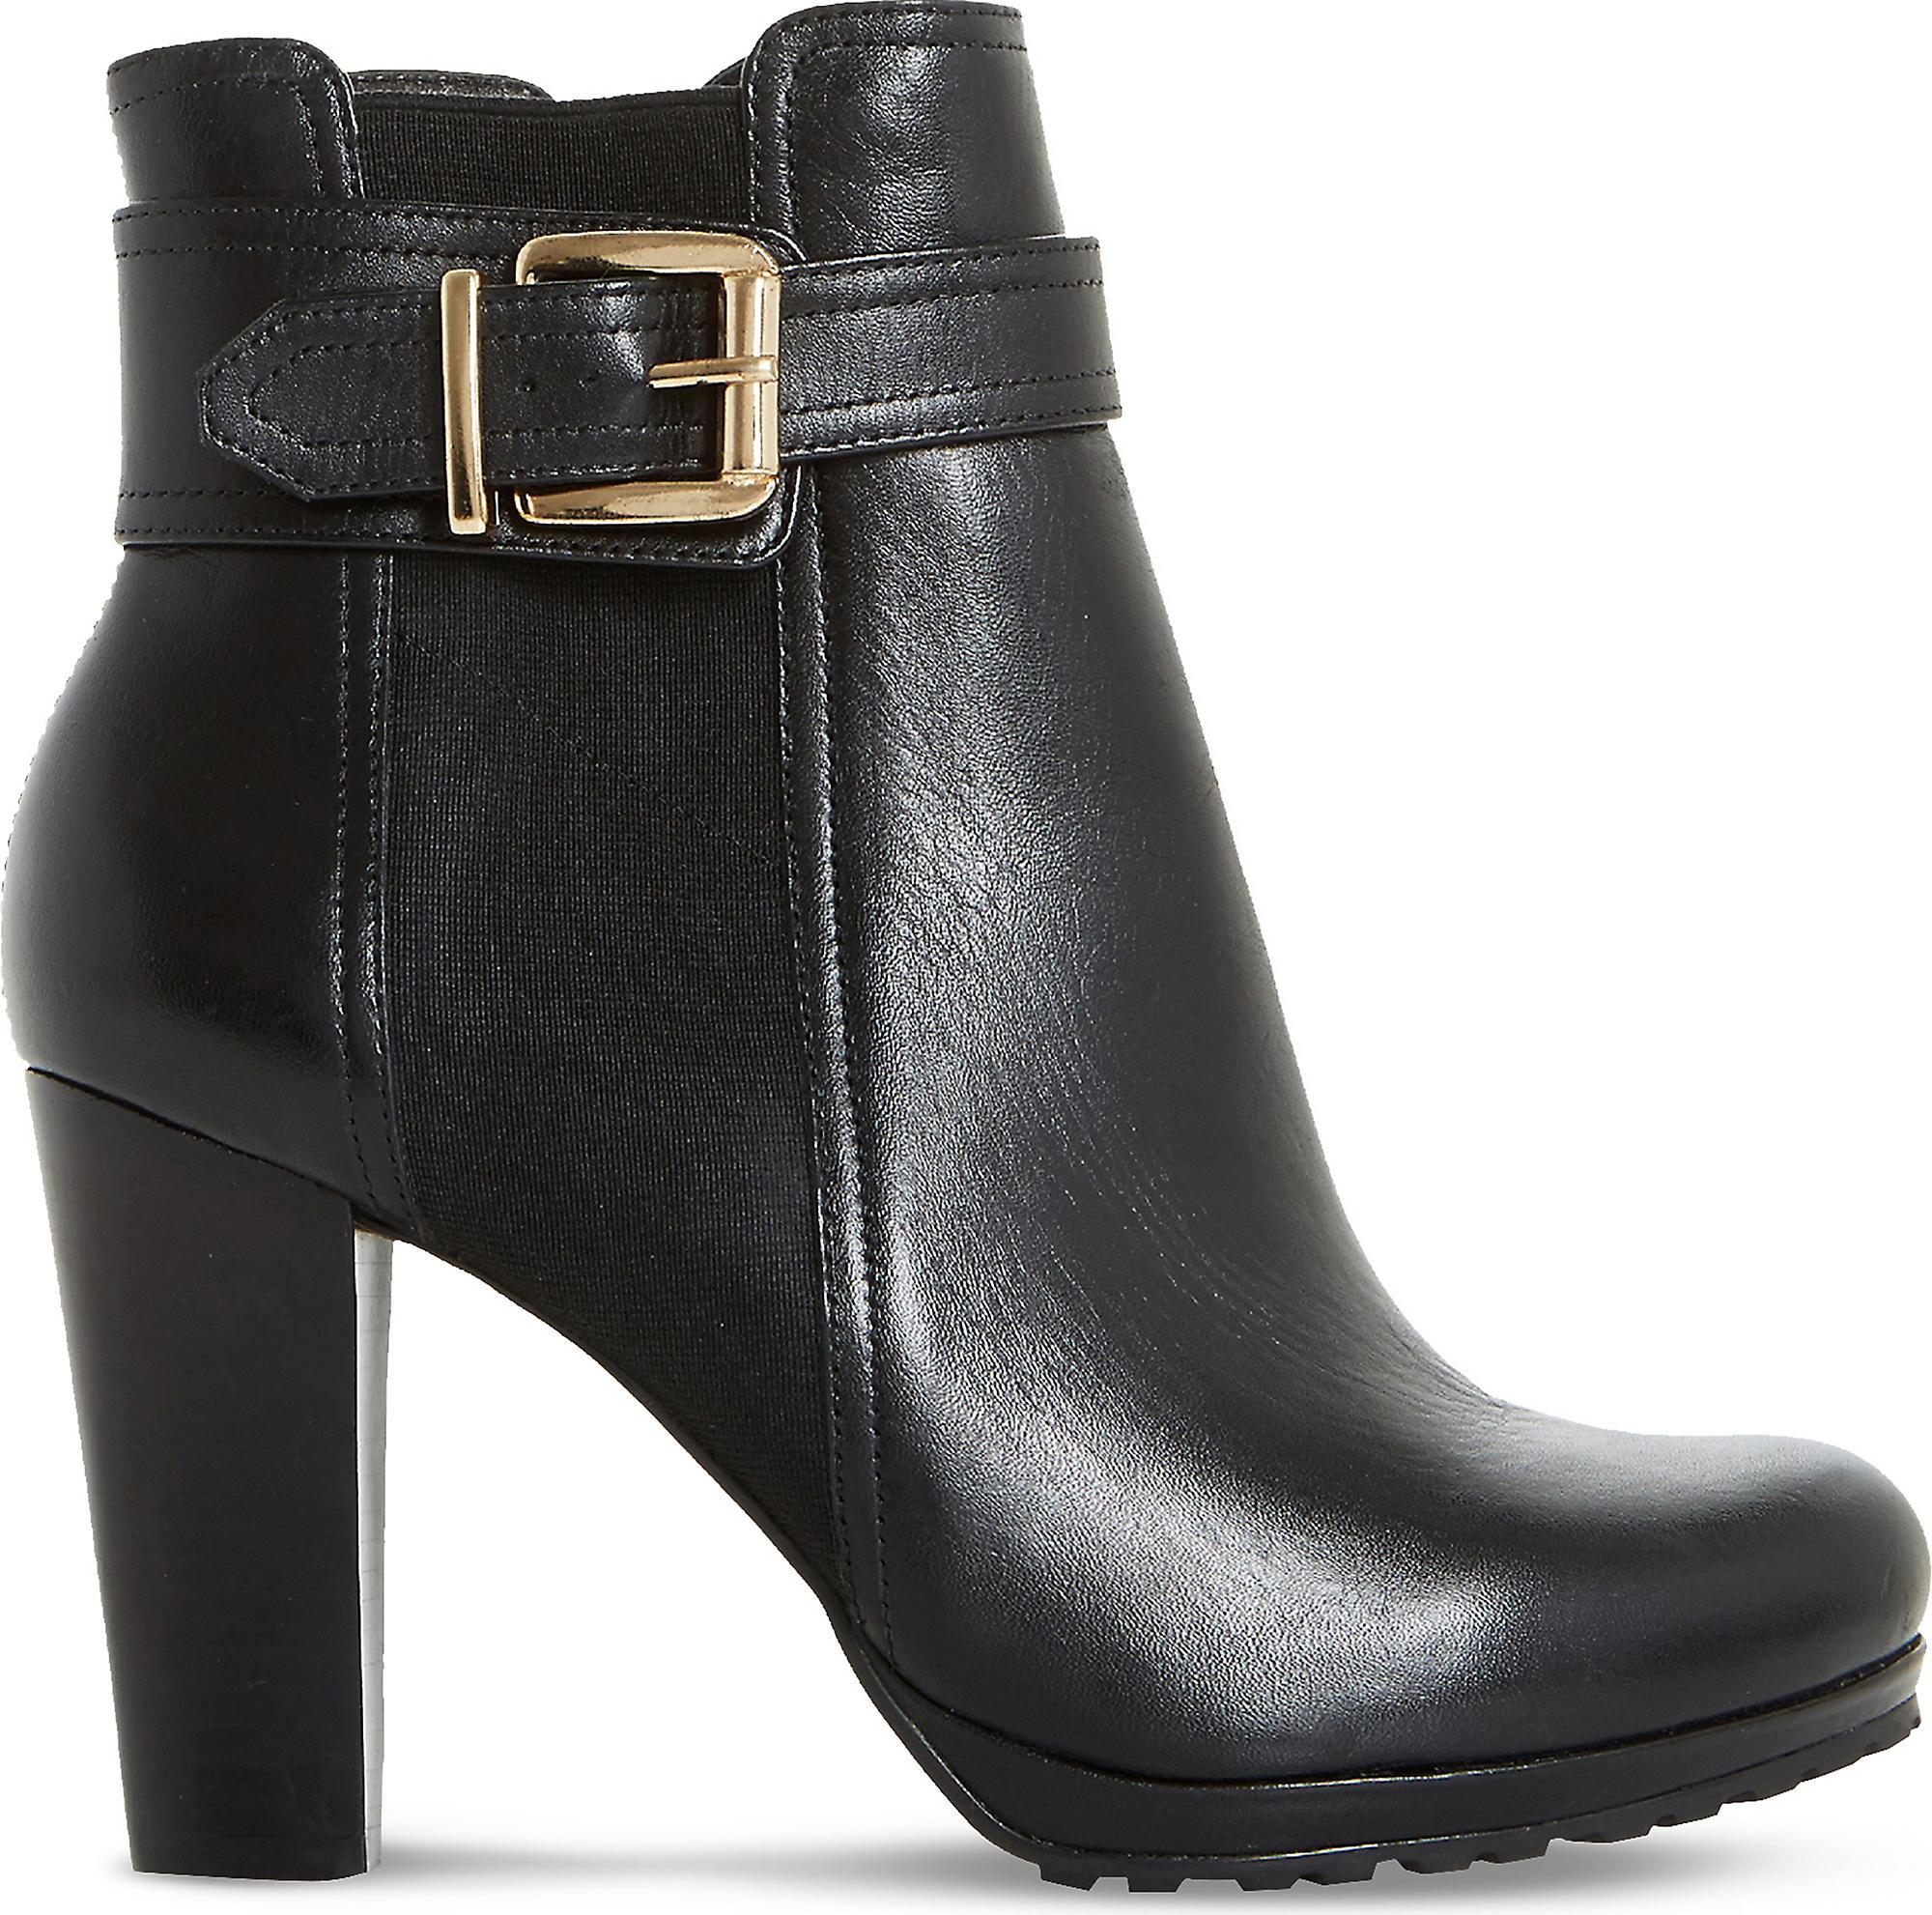 Dune Orine Leather Ankle Boots in Black-Leather (Black) - Lyst